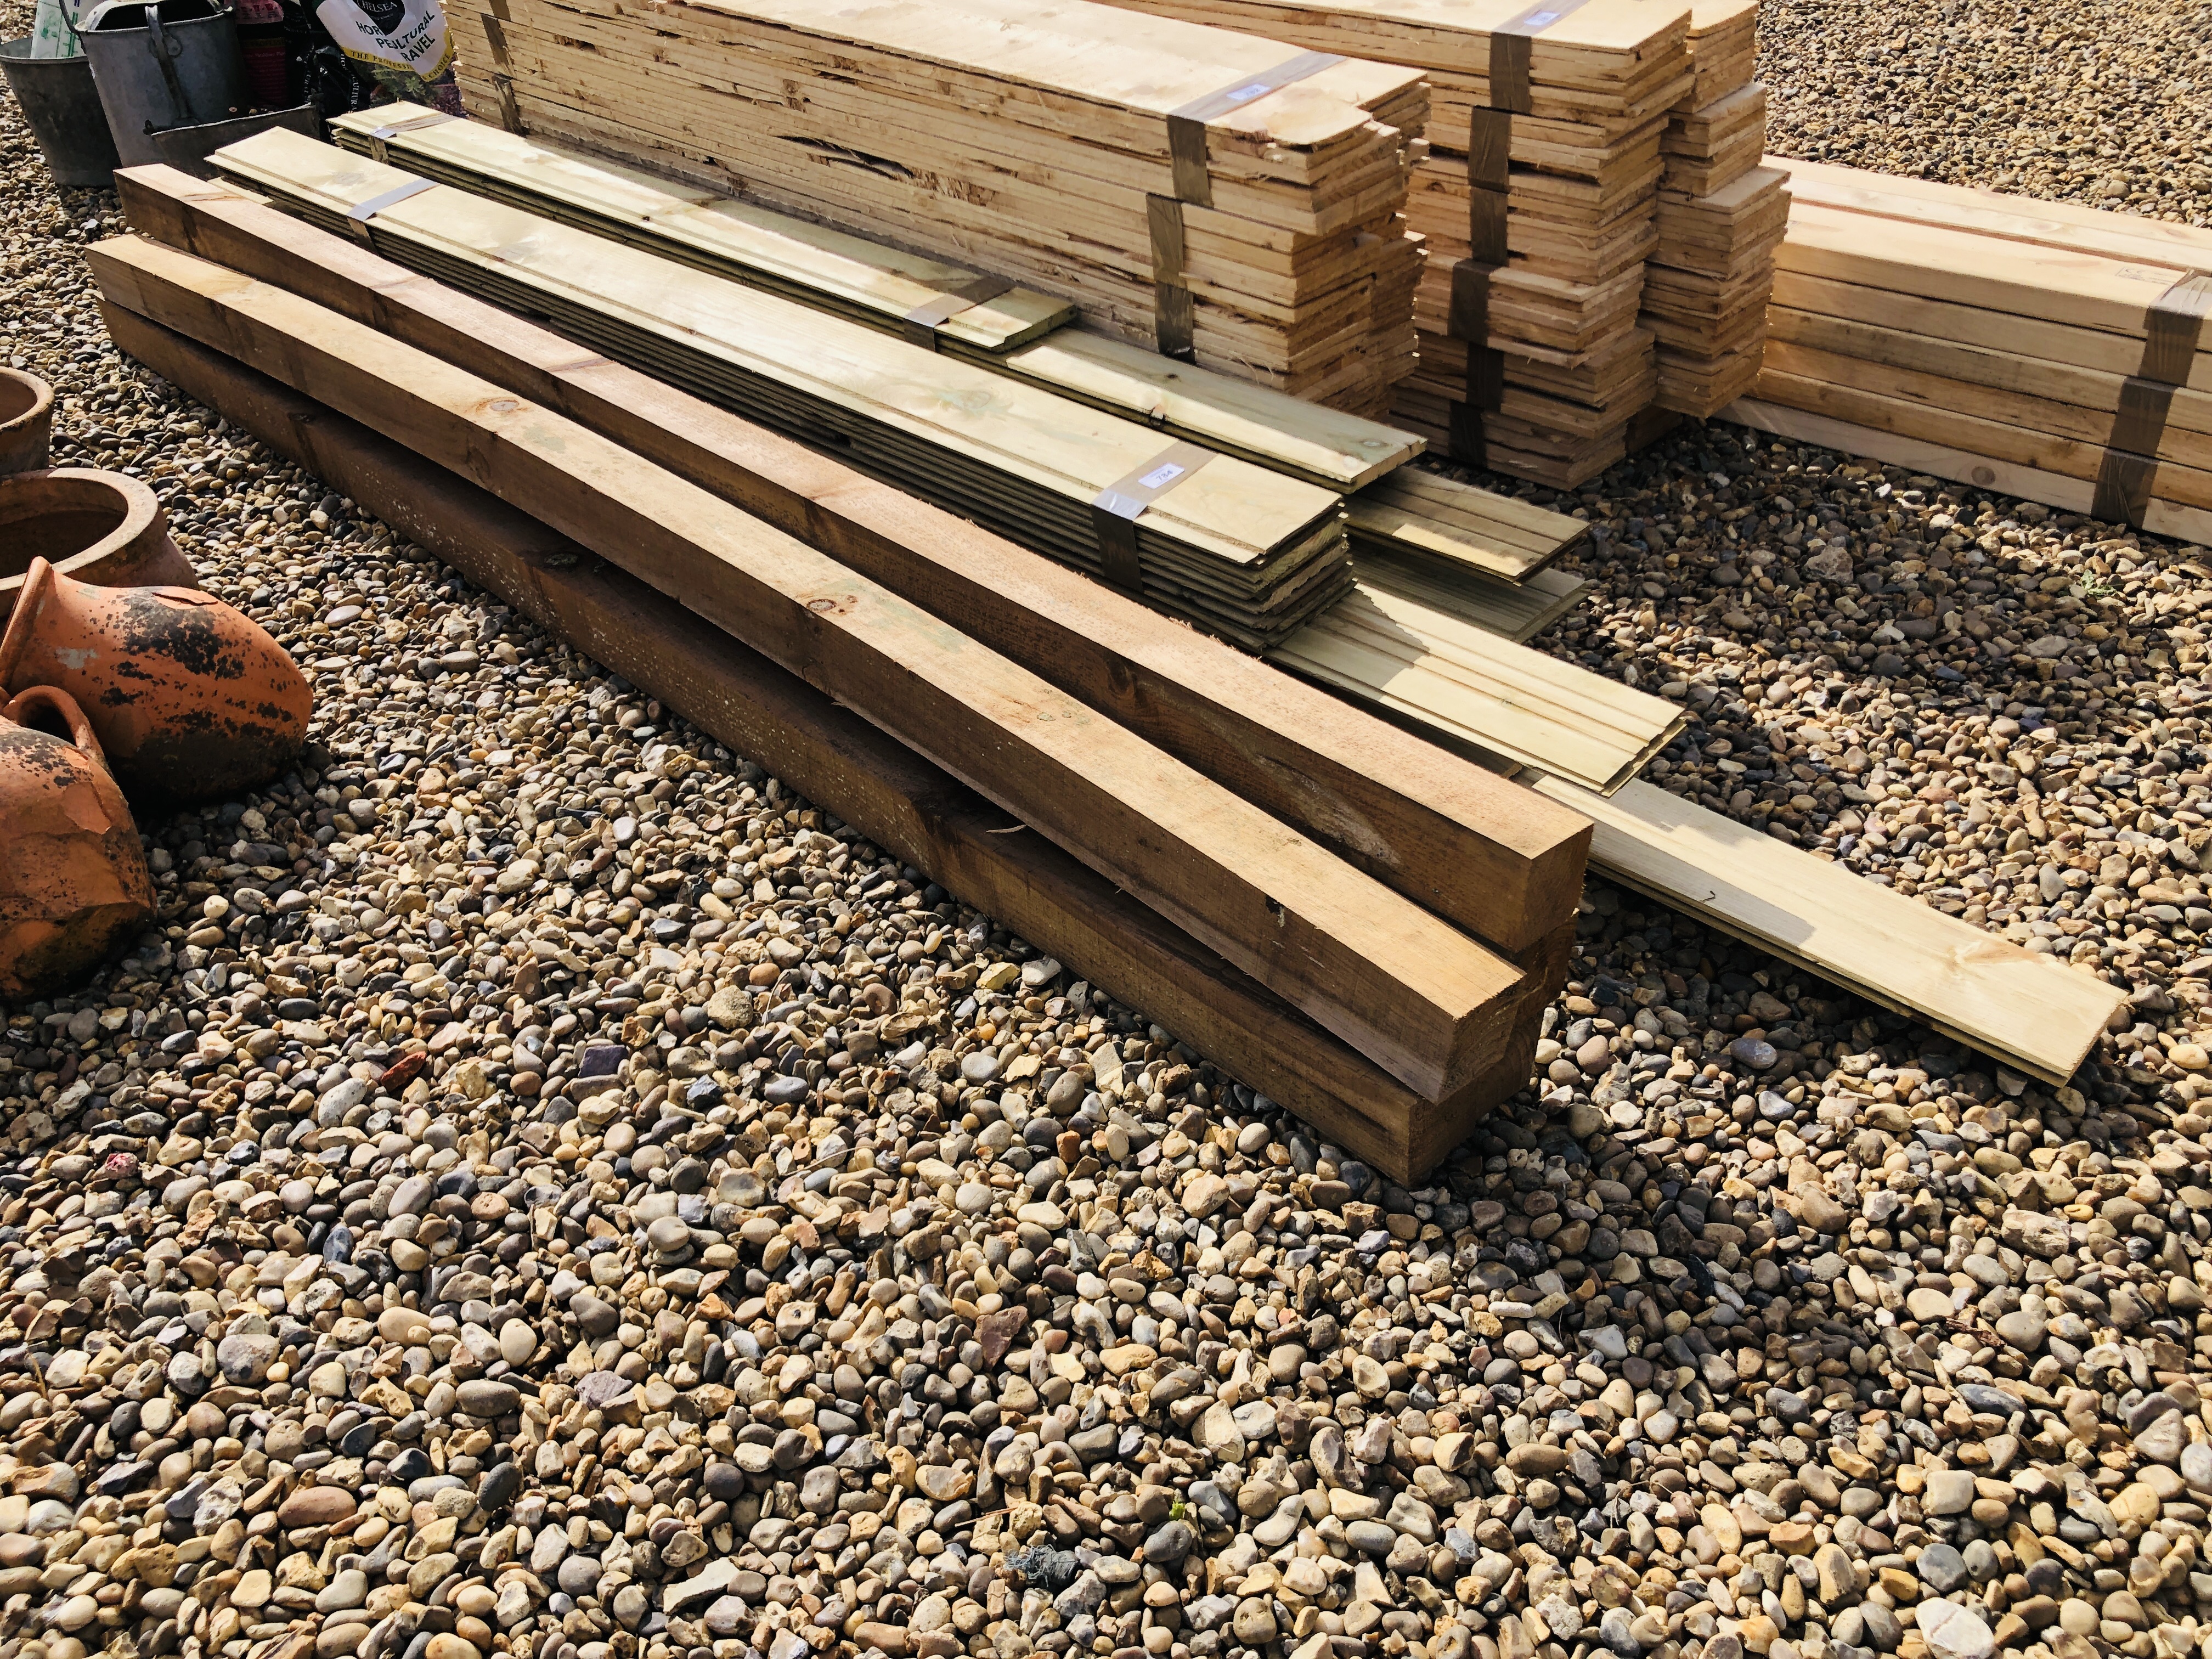 SIX BUNDLES OF TANALIZED SHIPLAP BOARDING VARIOUS LENGTHS AND 5 X 2.